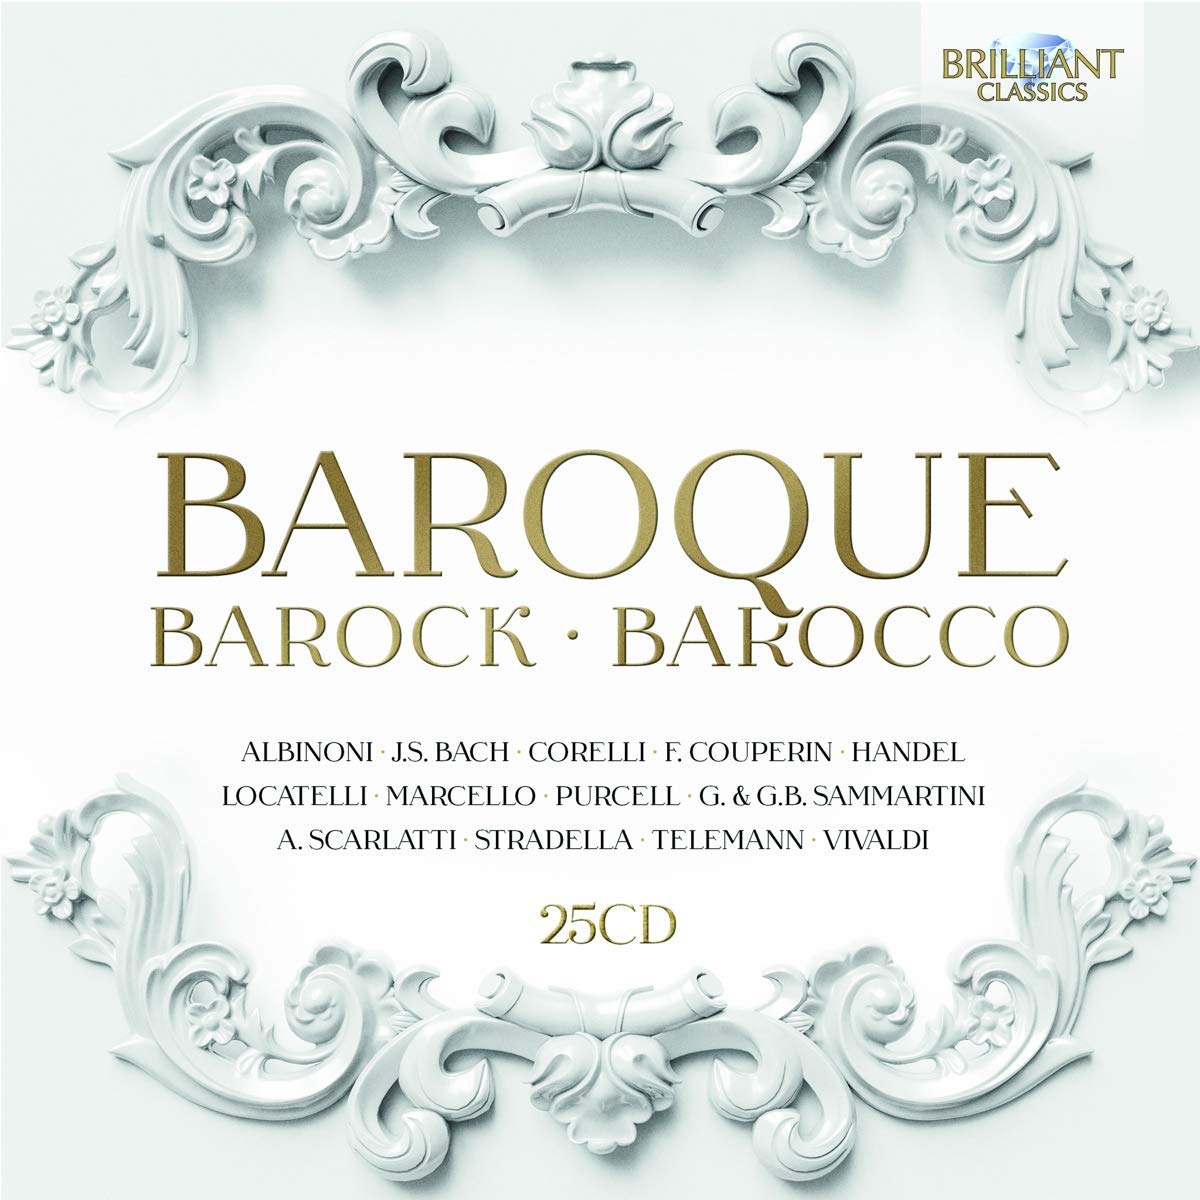 Cover of a box of CDs of Baroque music